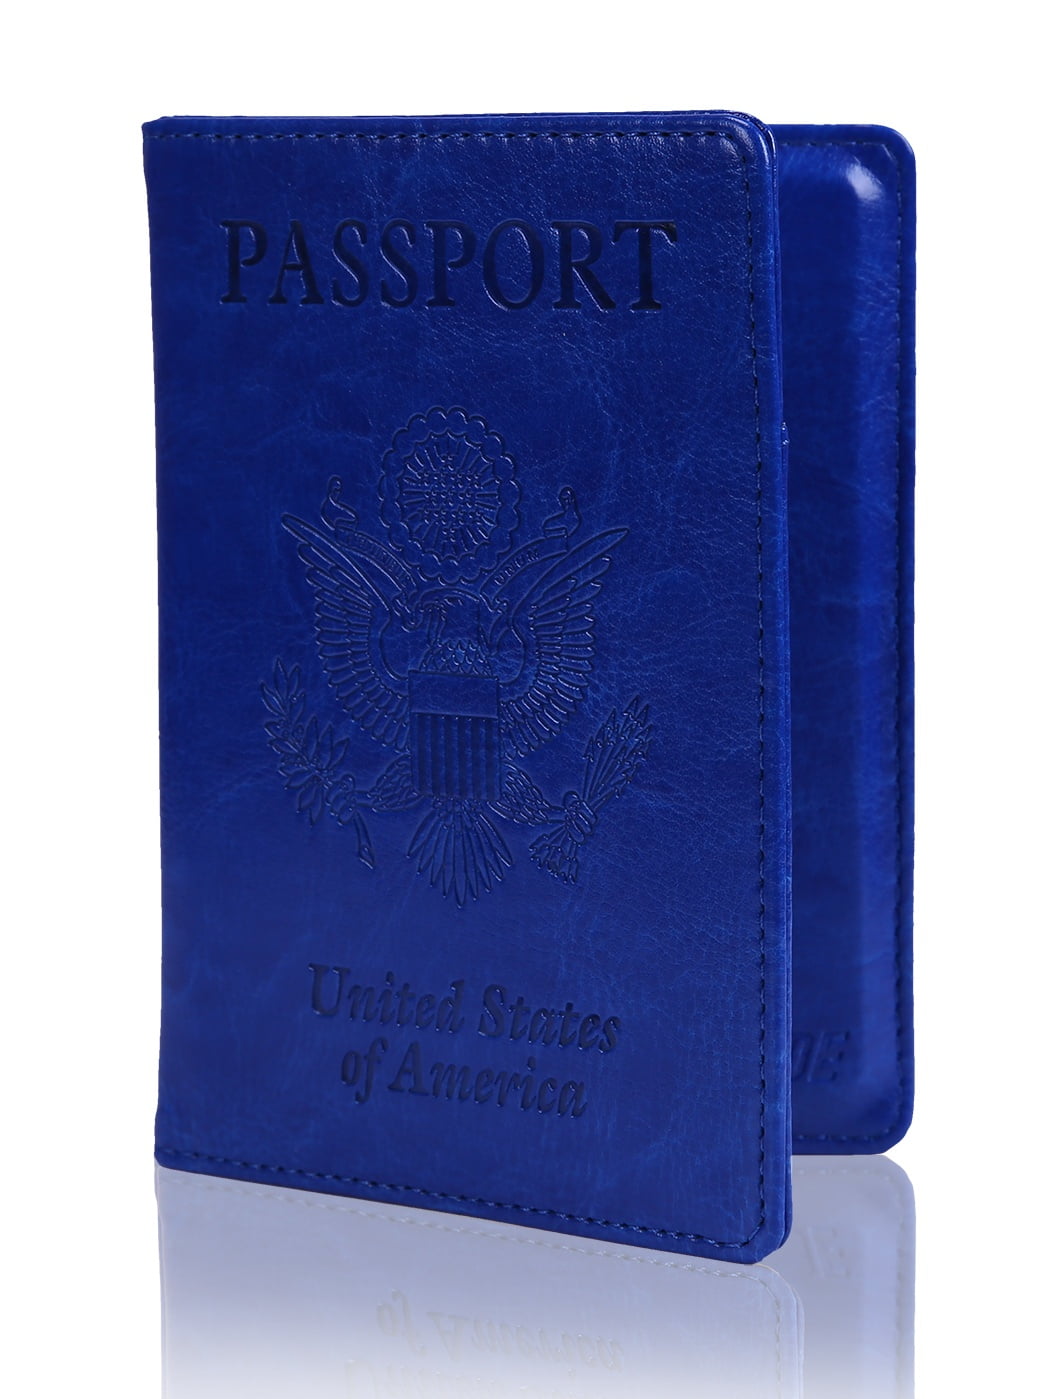 Passport Covers,Leather Passport Holder RFID Blocking,Travel Document Holder for Men&Women,Credit Card and Document Protection